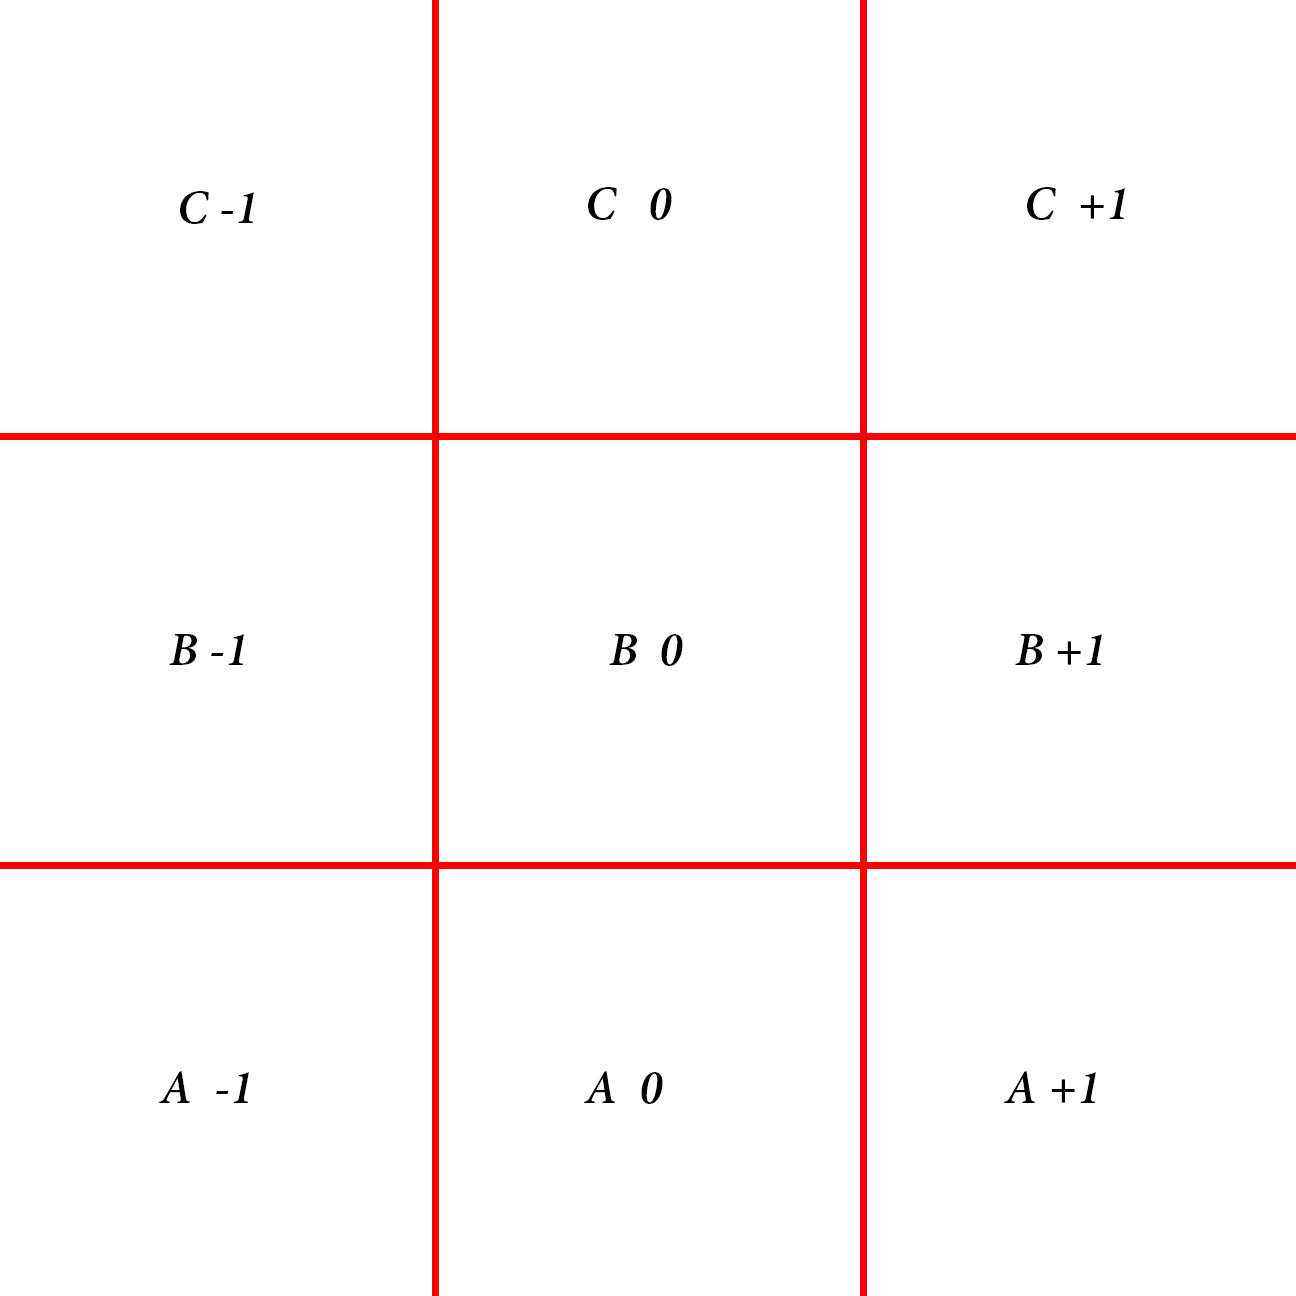 Landing grid example showing nine boxes. The boxes in the first row are labeled C -1, C 0, and C +1 from left to right. The boxes in the second row are labeled B -1, B 0, and B +1, from left to right. The boxes in the third row are labeled A -1, A 0, and A +1, from left to right.